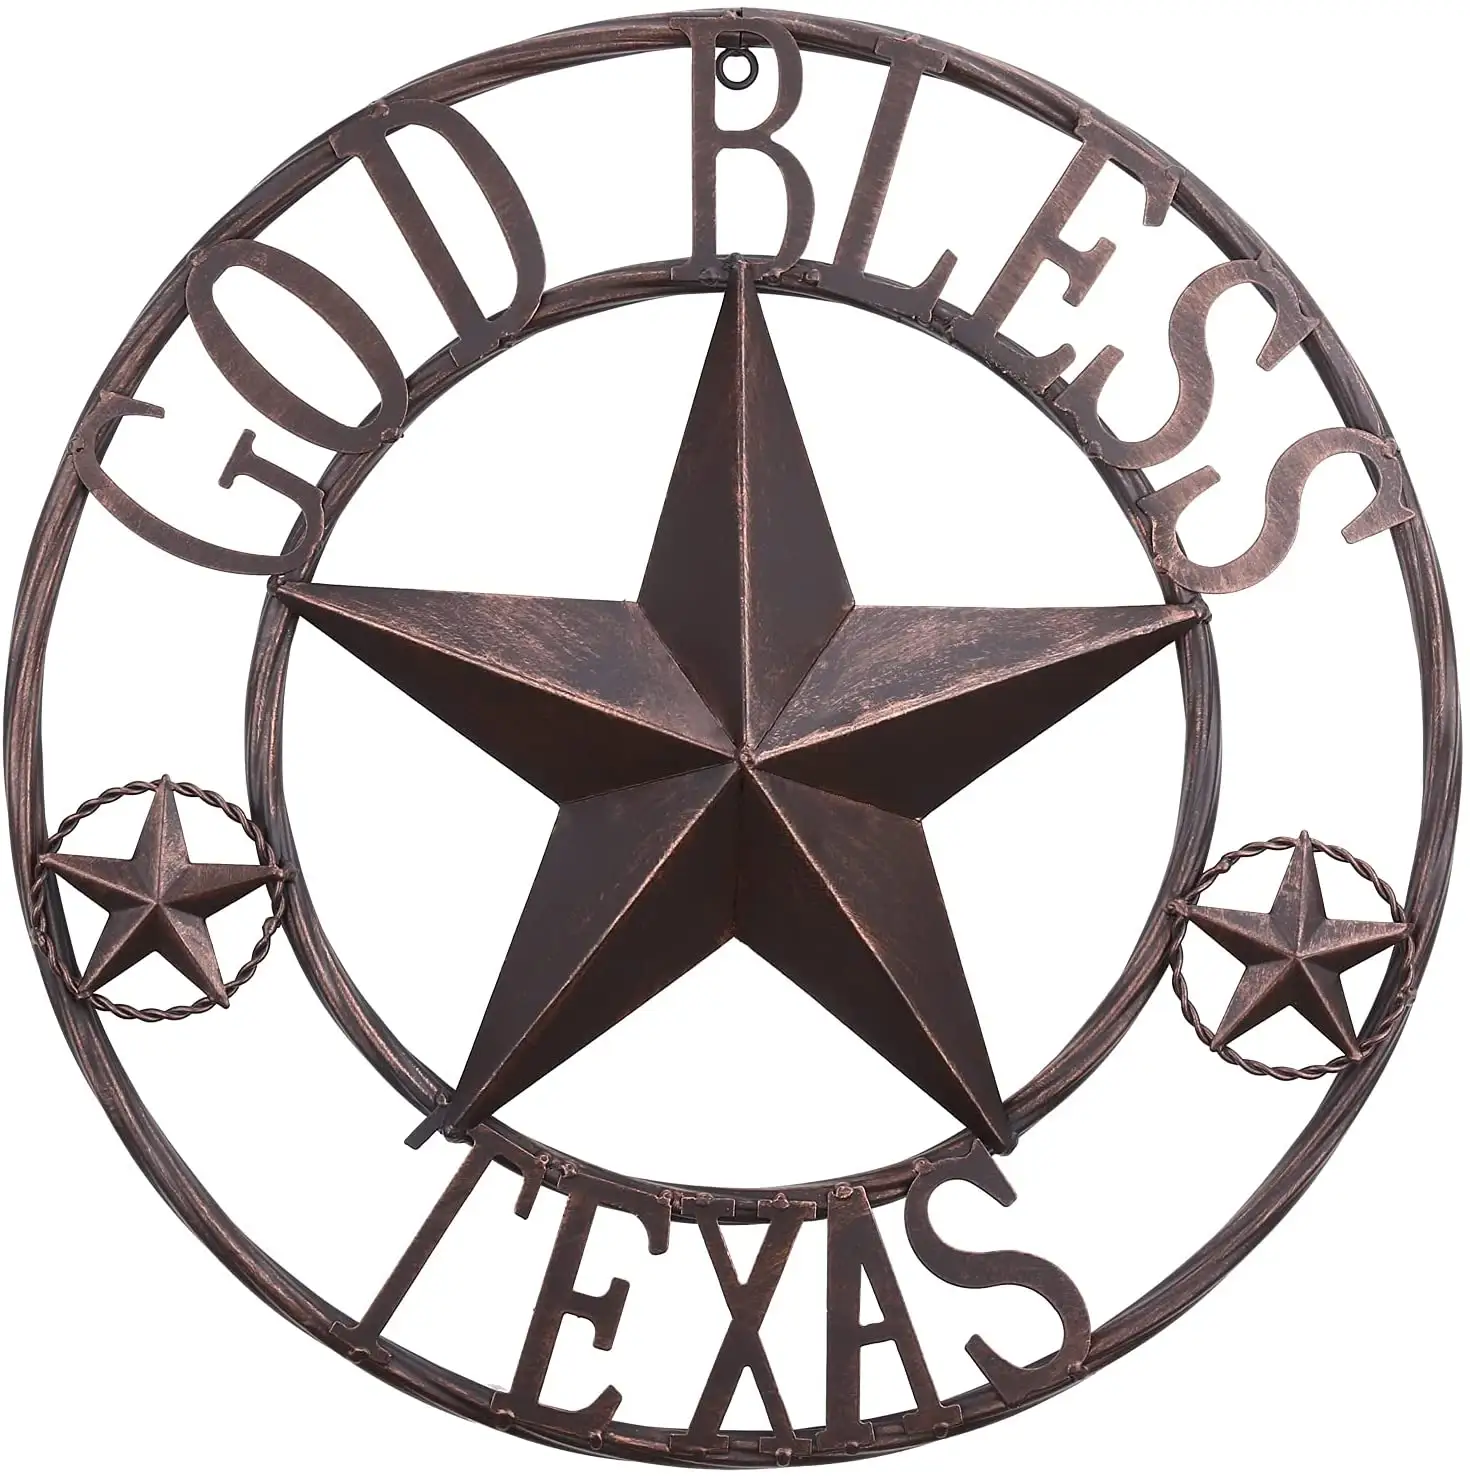 Amazon Hot selling Round metal Vintage Rustic Texas Star State interior home decoration wall art home decor